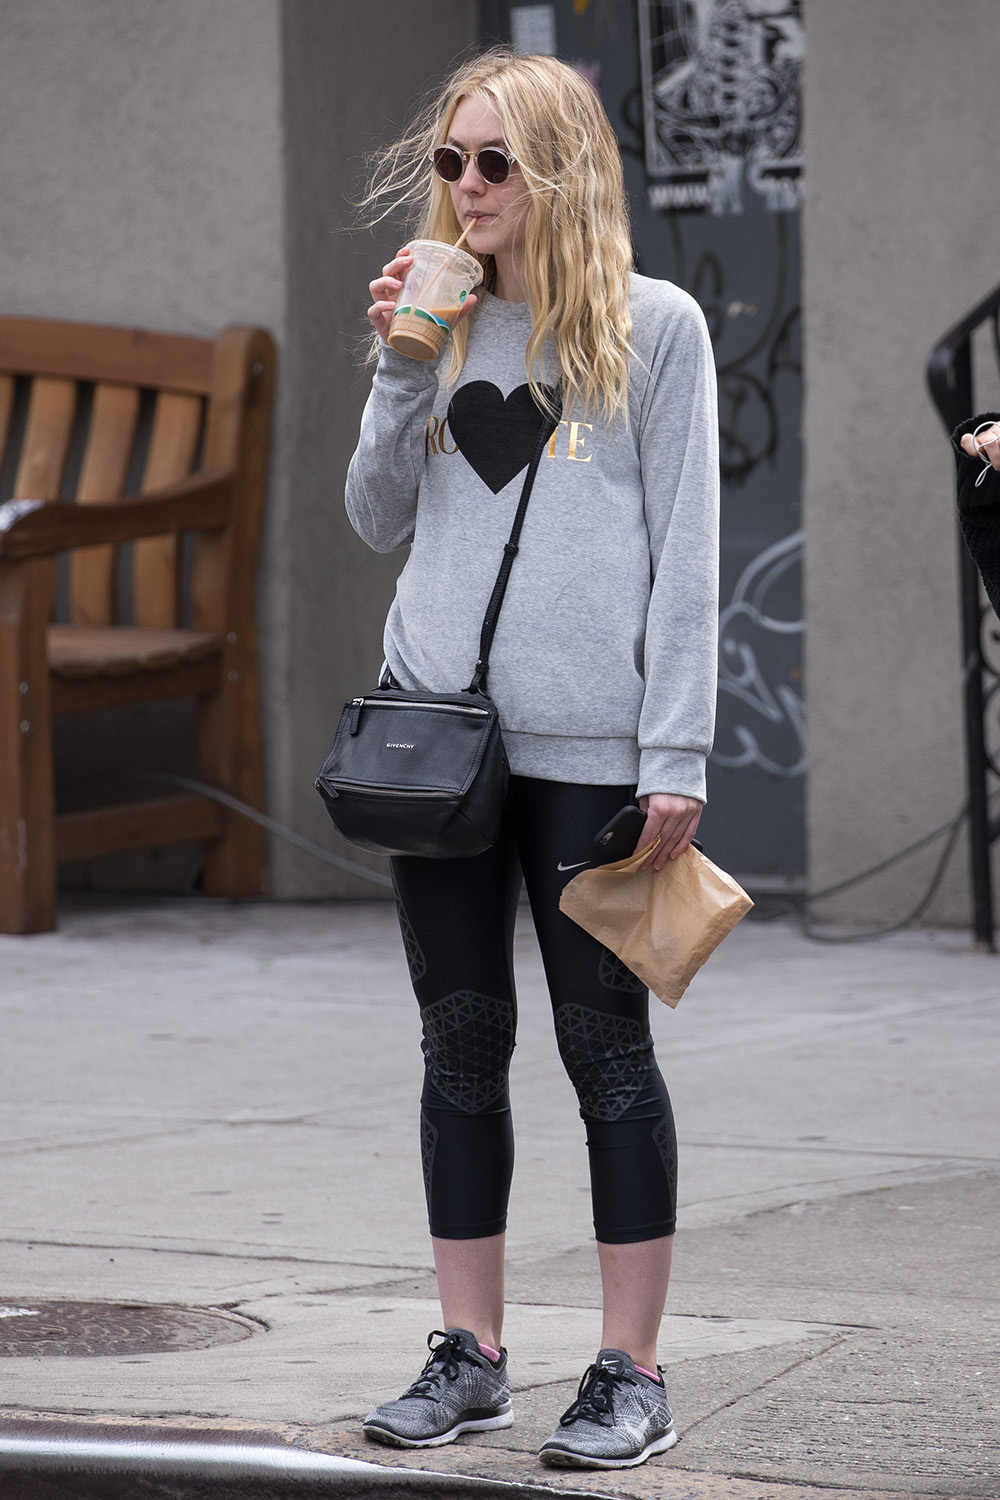 Dakota Fanning keeps things cool in a grey Rodarte sweater while out and about in New York.